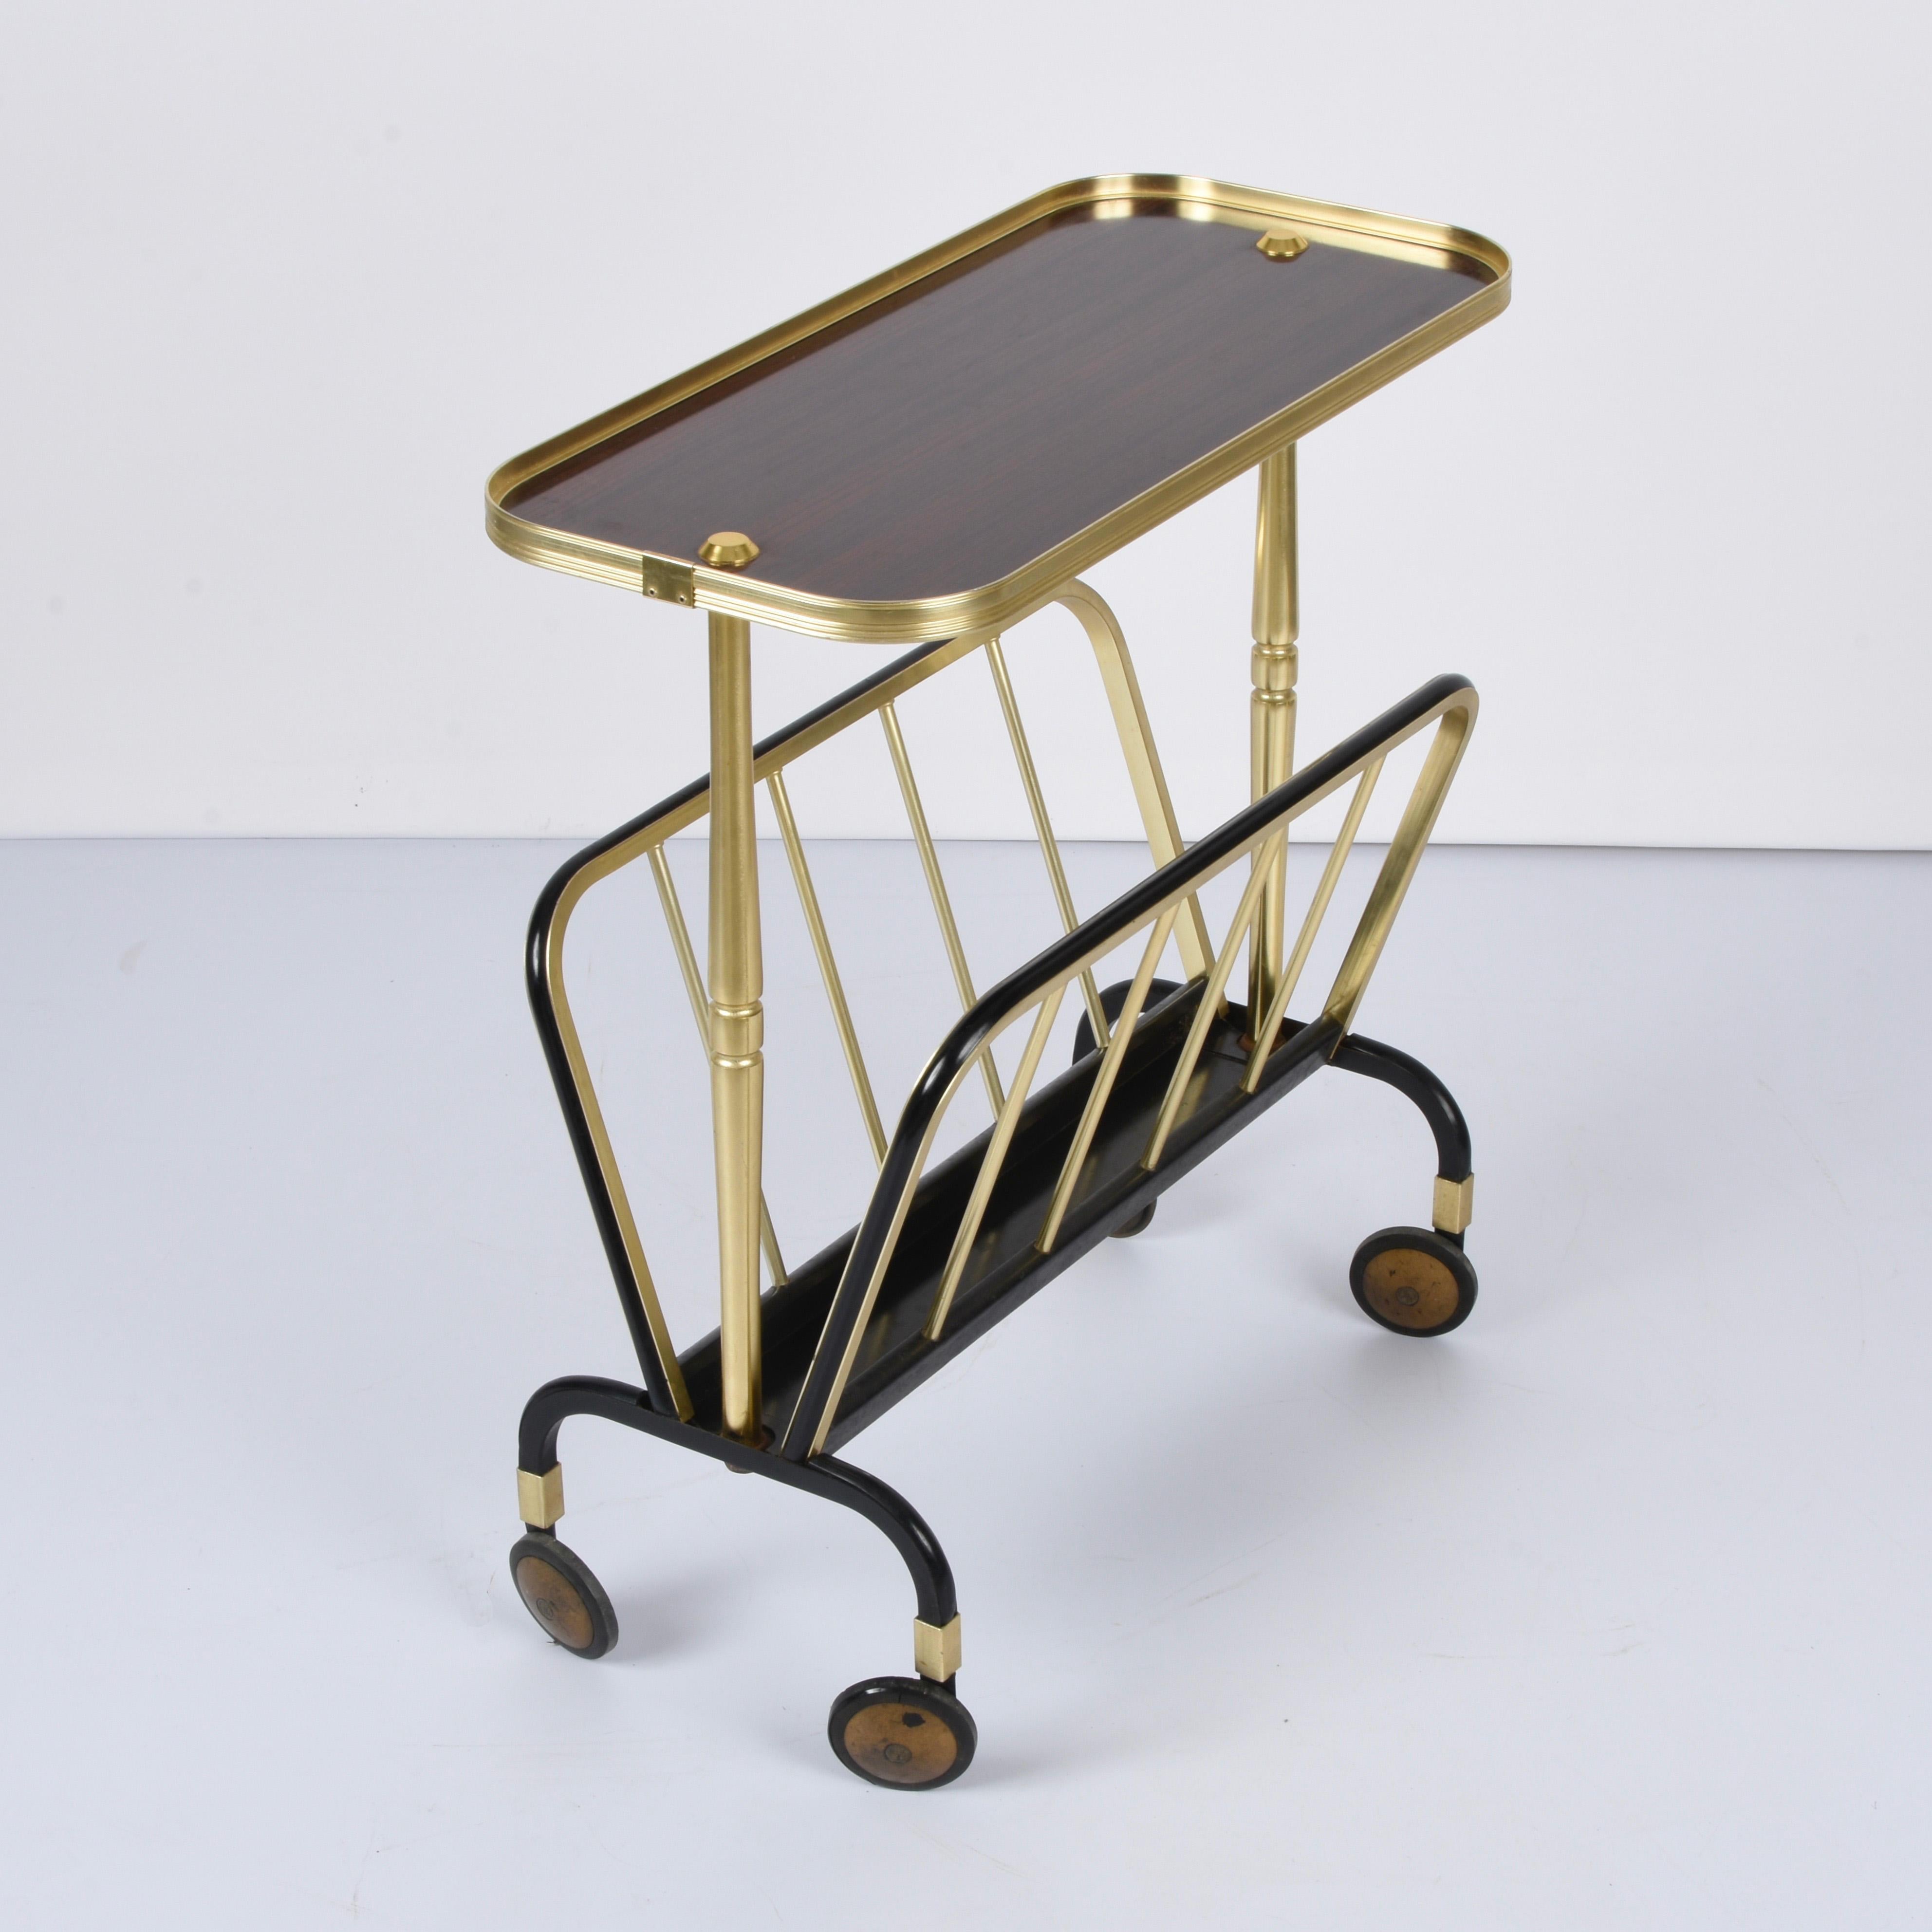 Ico Parisi Midcentury Aluminum and Formica Trolley Magazine Rack for MB, 1960s For Sale 5